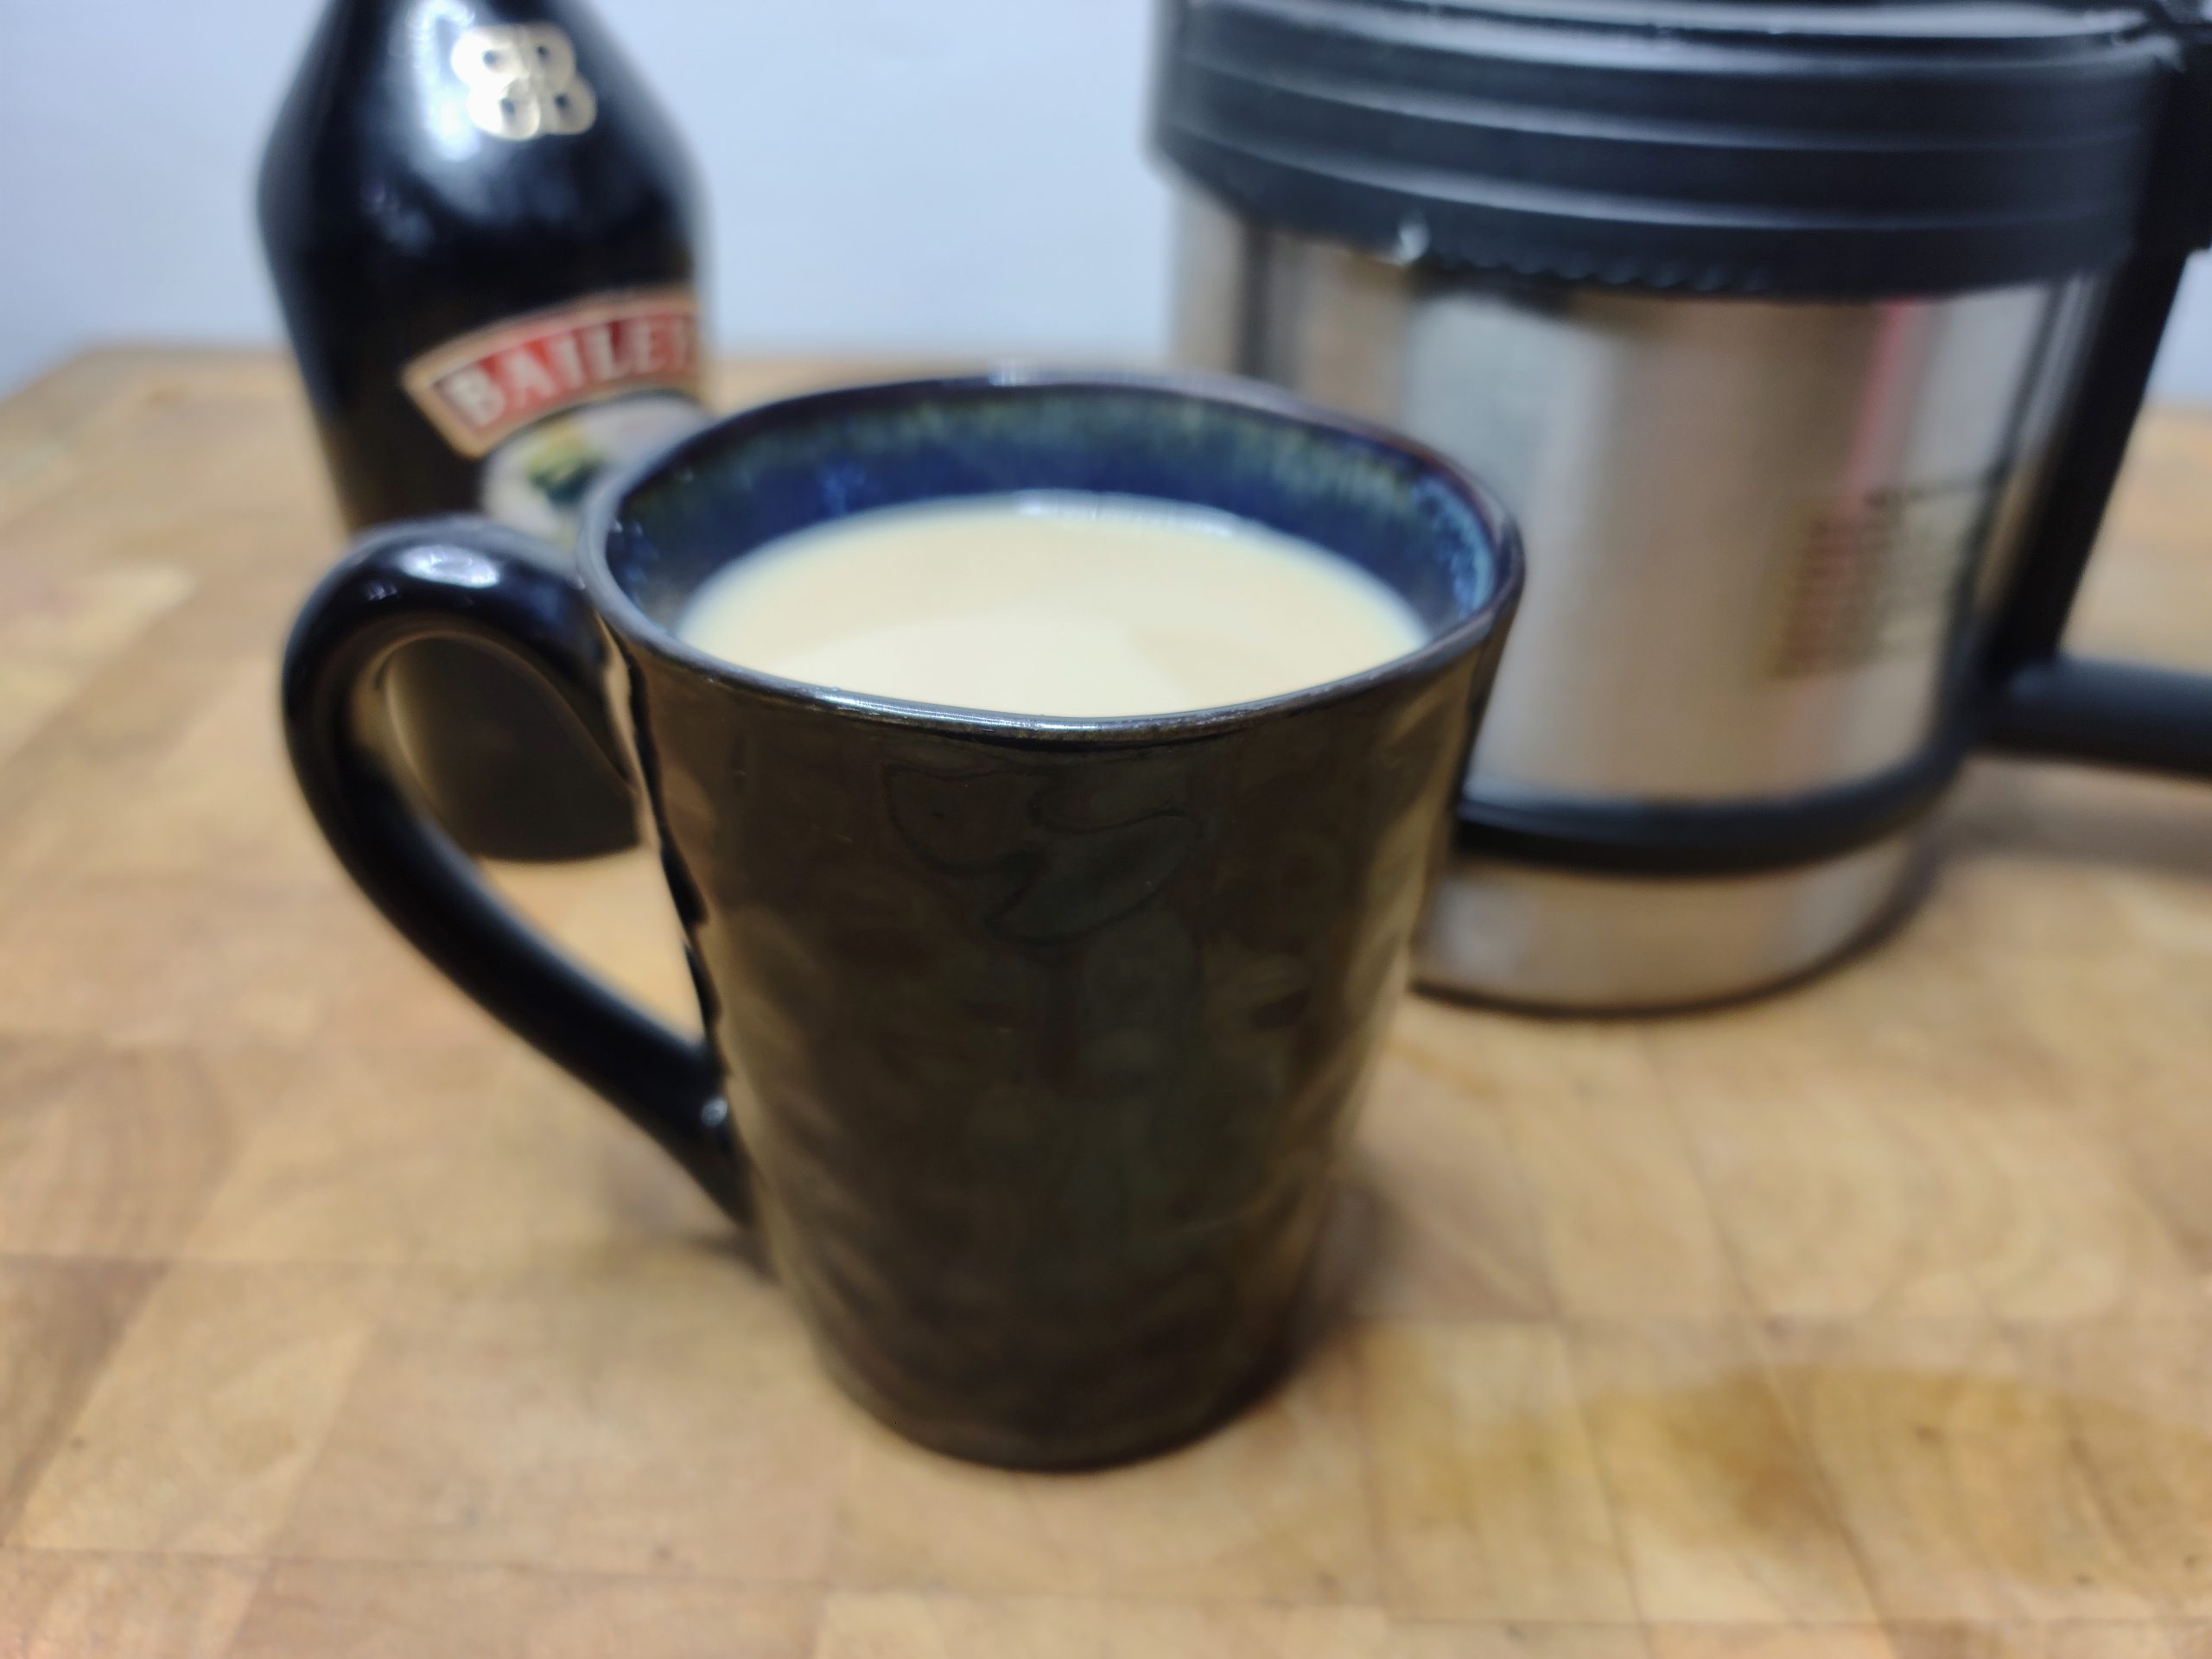 bailey's coffee in a mug with ingredients in the background